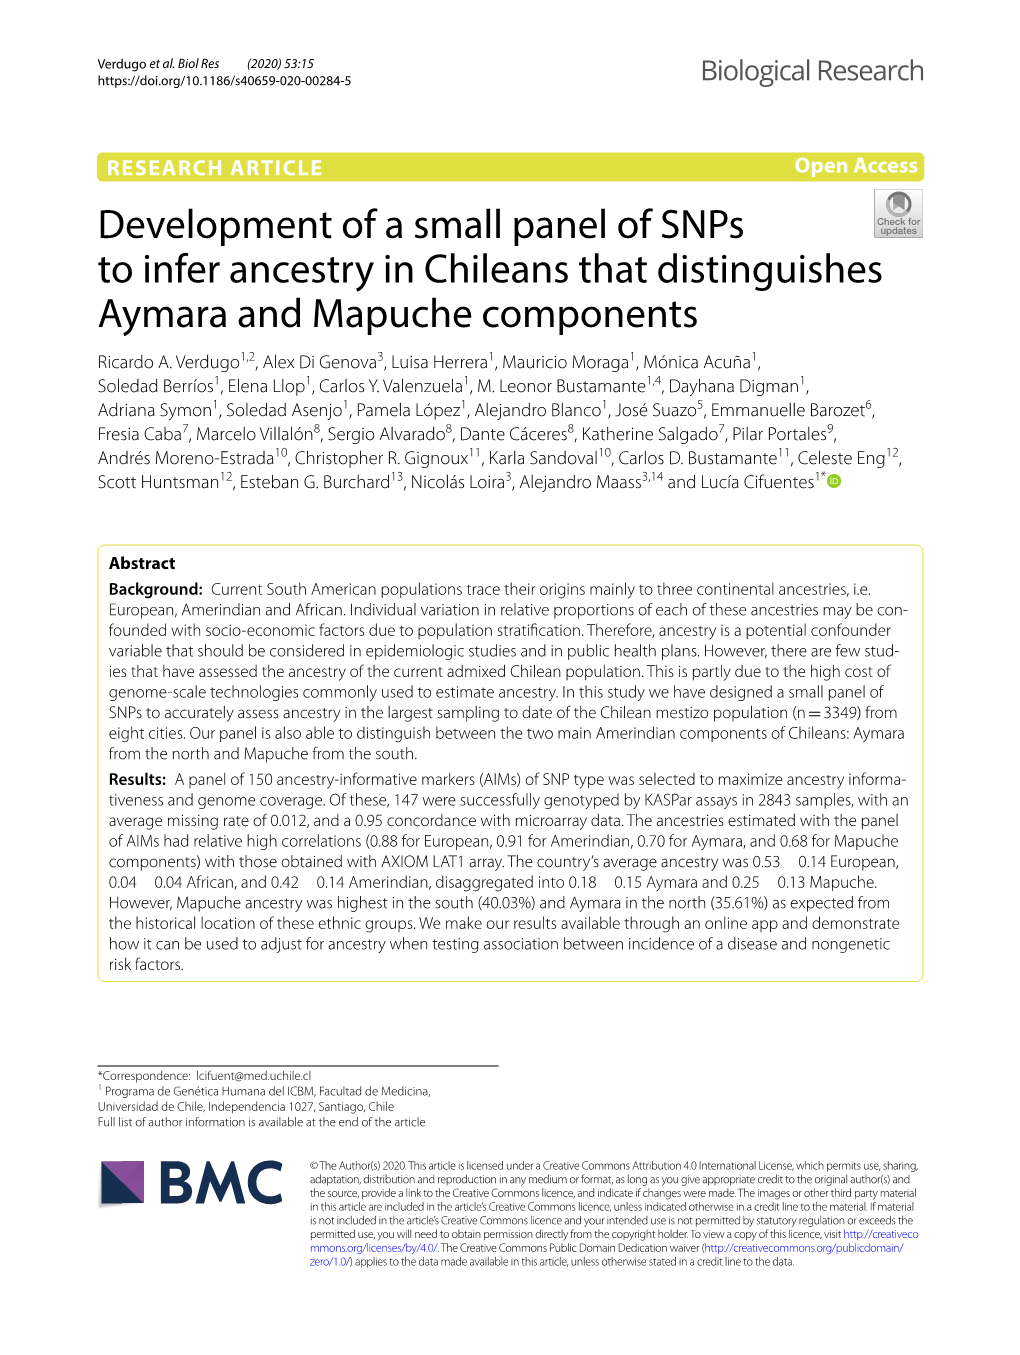 Development of a Small Panel of Snps to Infer Ancestry in Chileans That Distinguishes Aymara and Mapuche Components Ricardo A